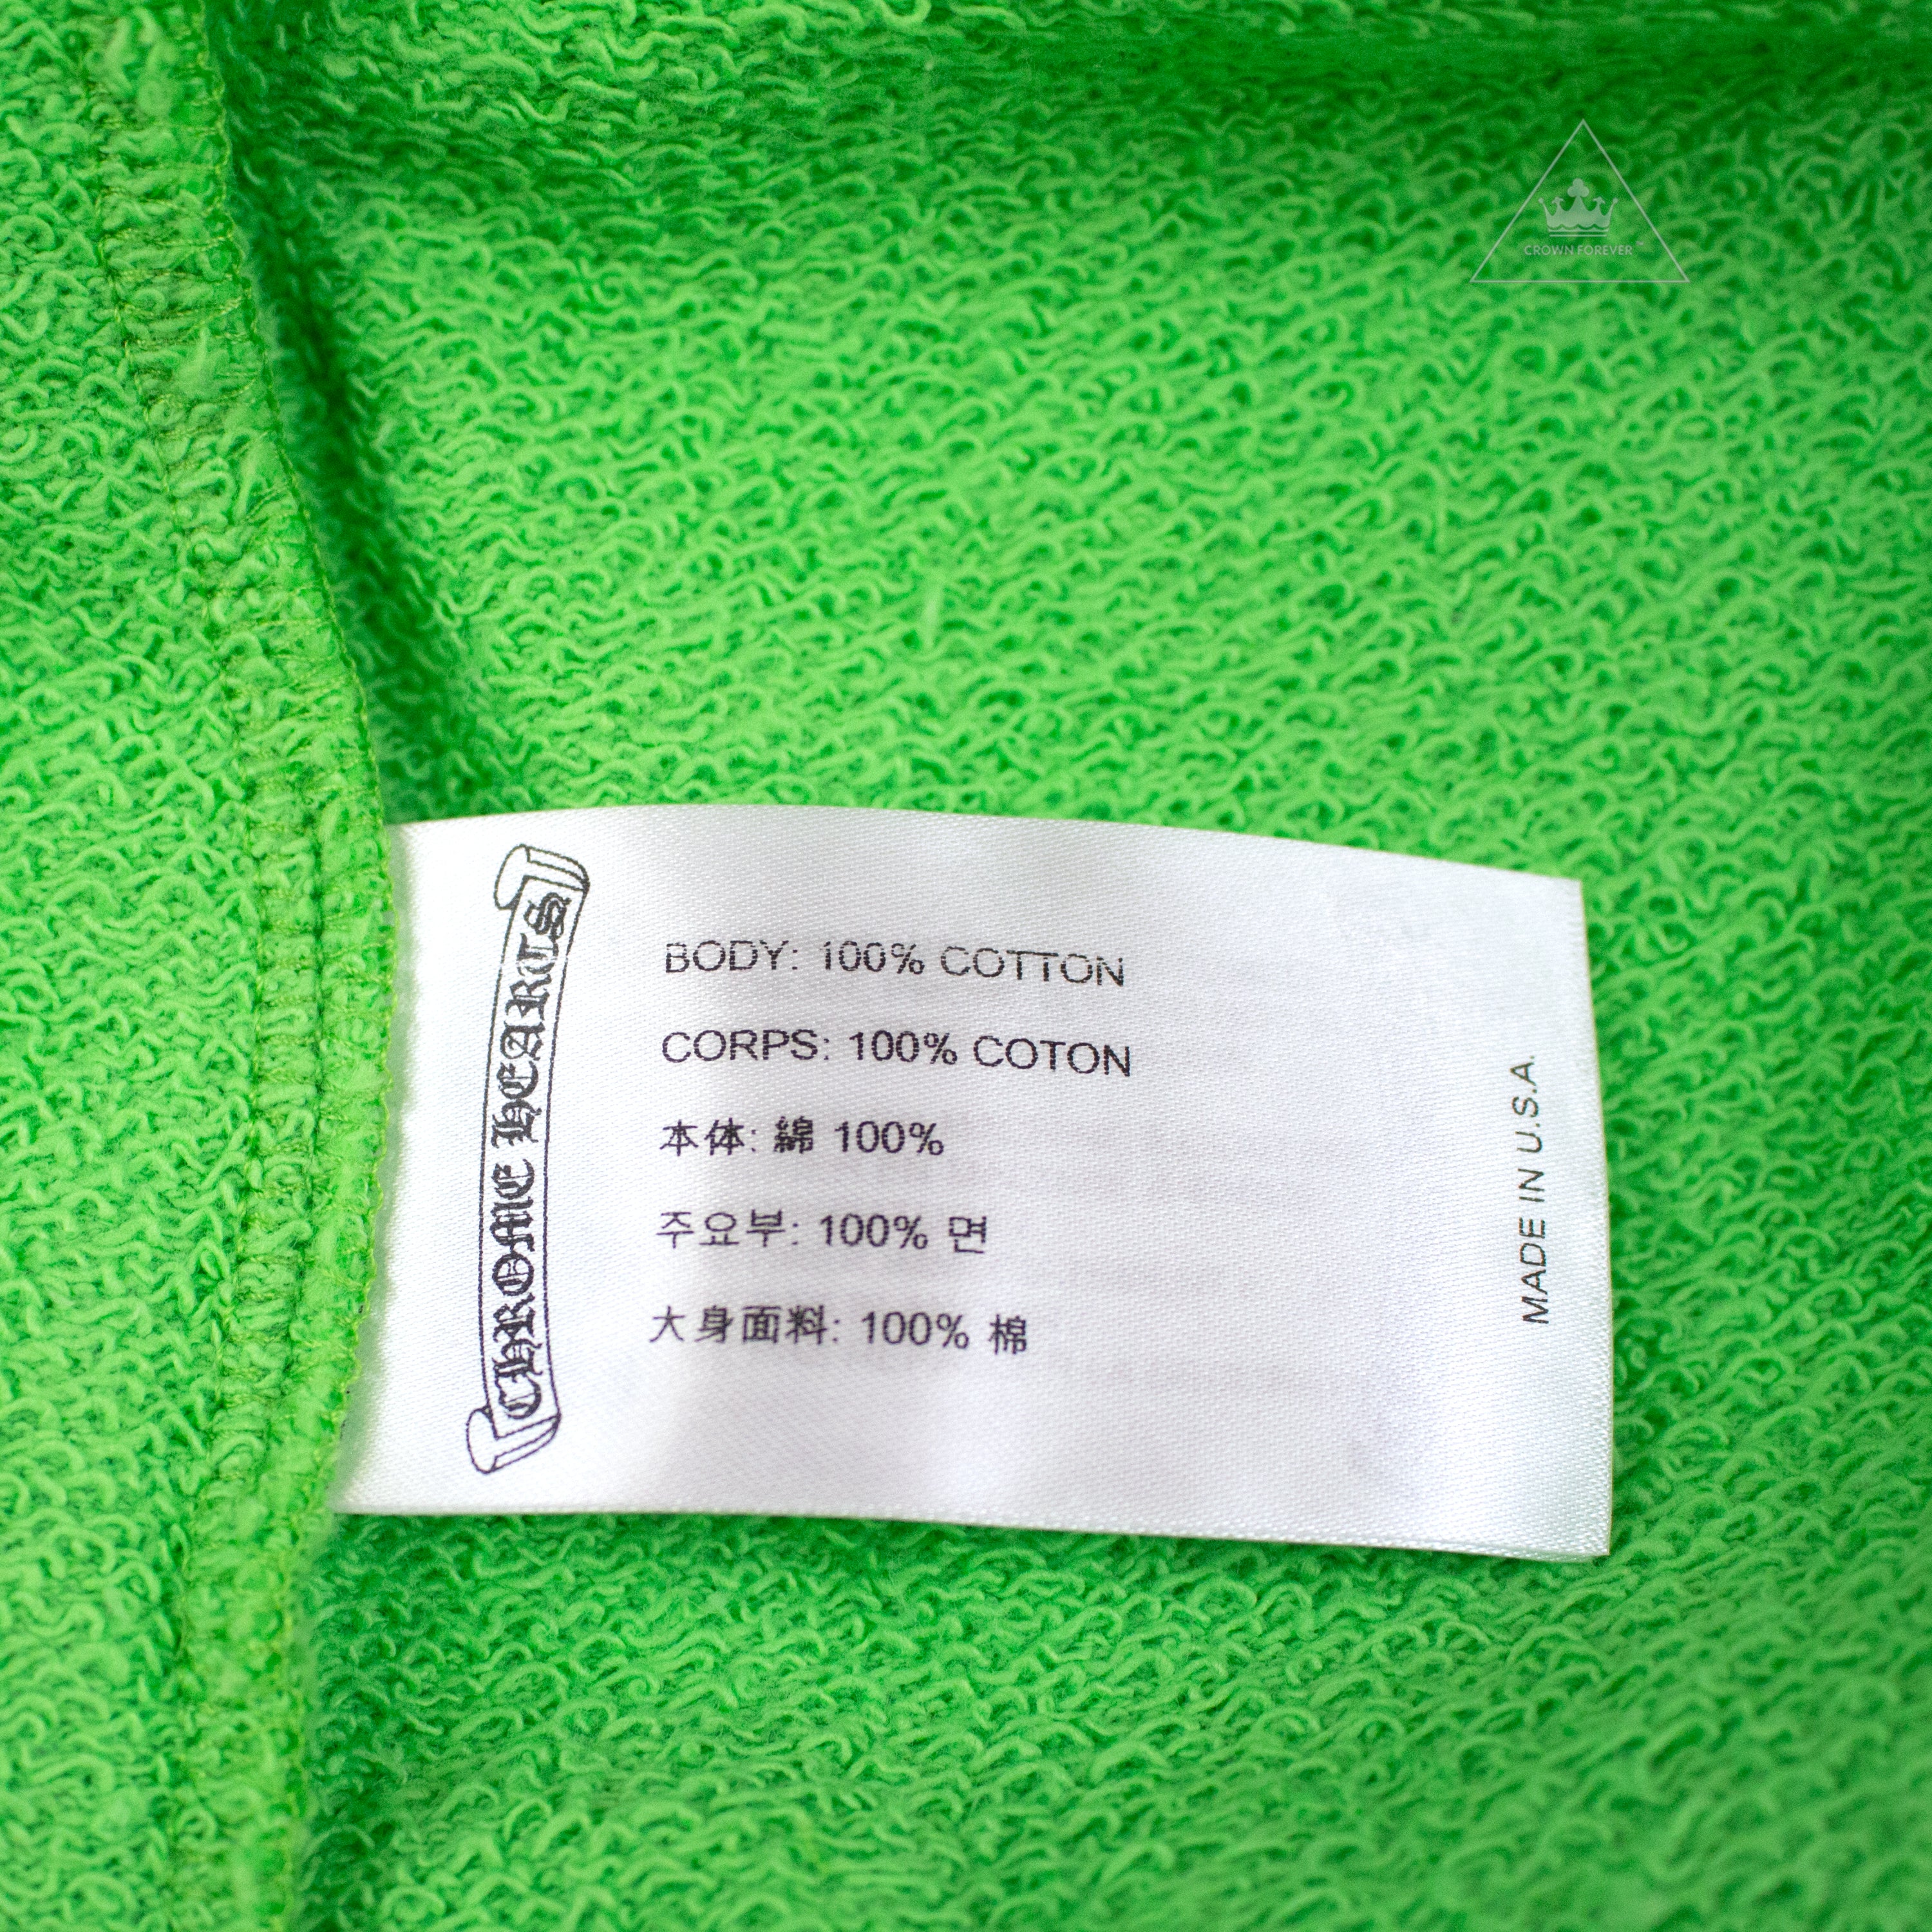 CH Matty Boy Sex Records Hooded Sweater Slime Green